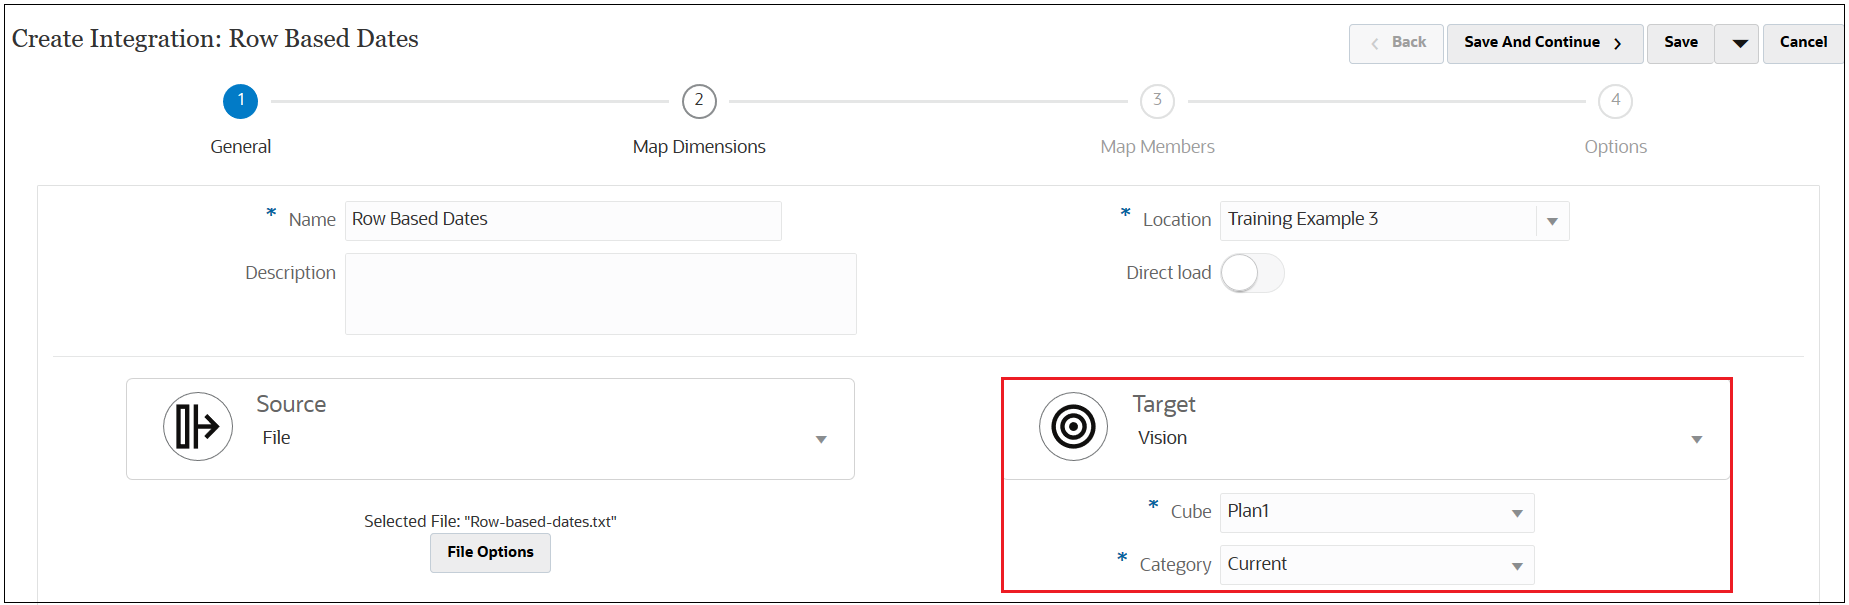 Create Integration screen with the Target information highlighted